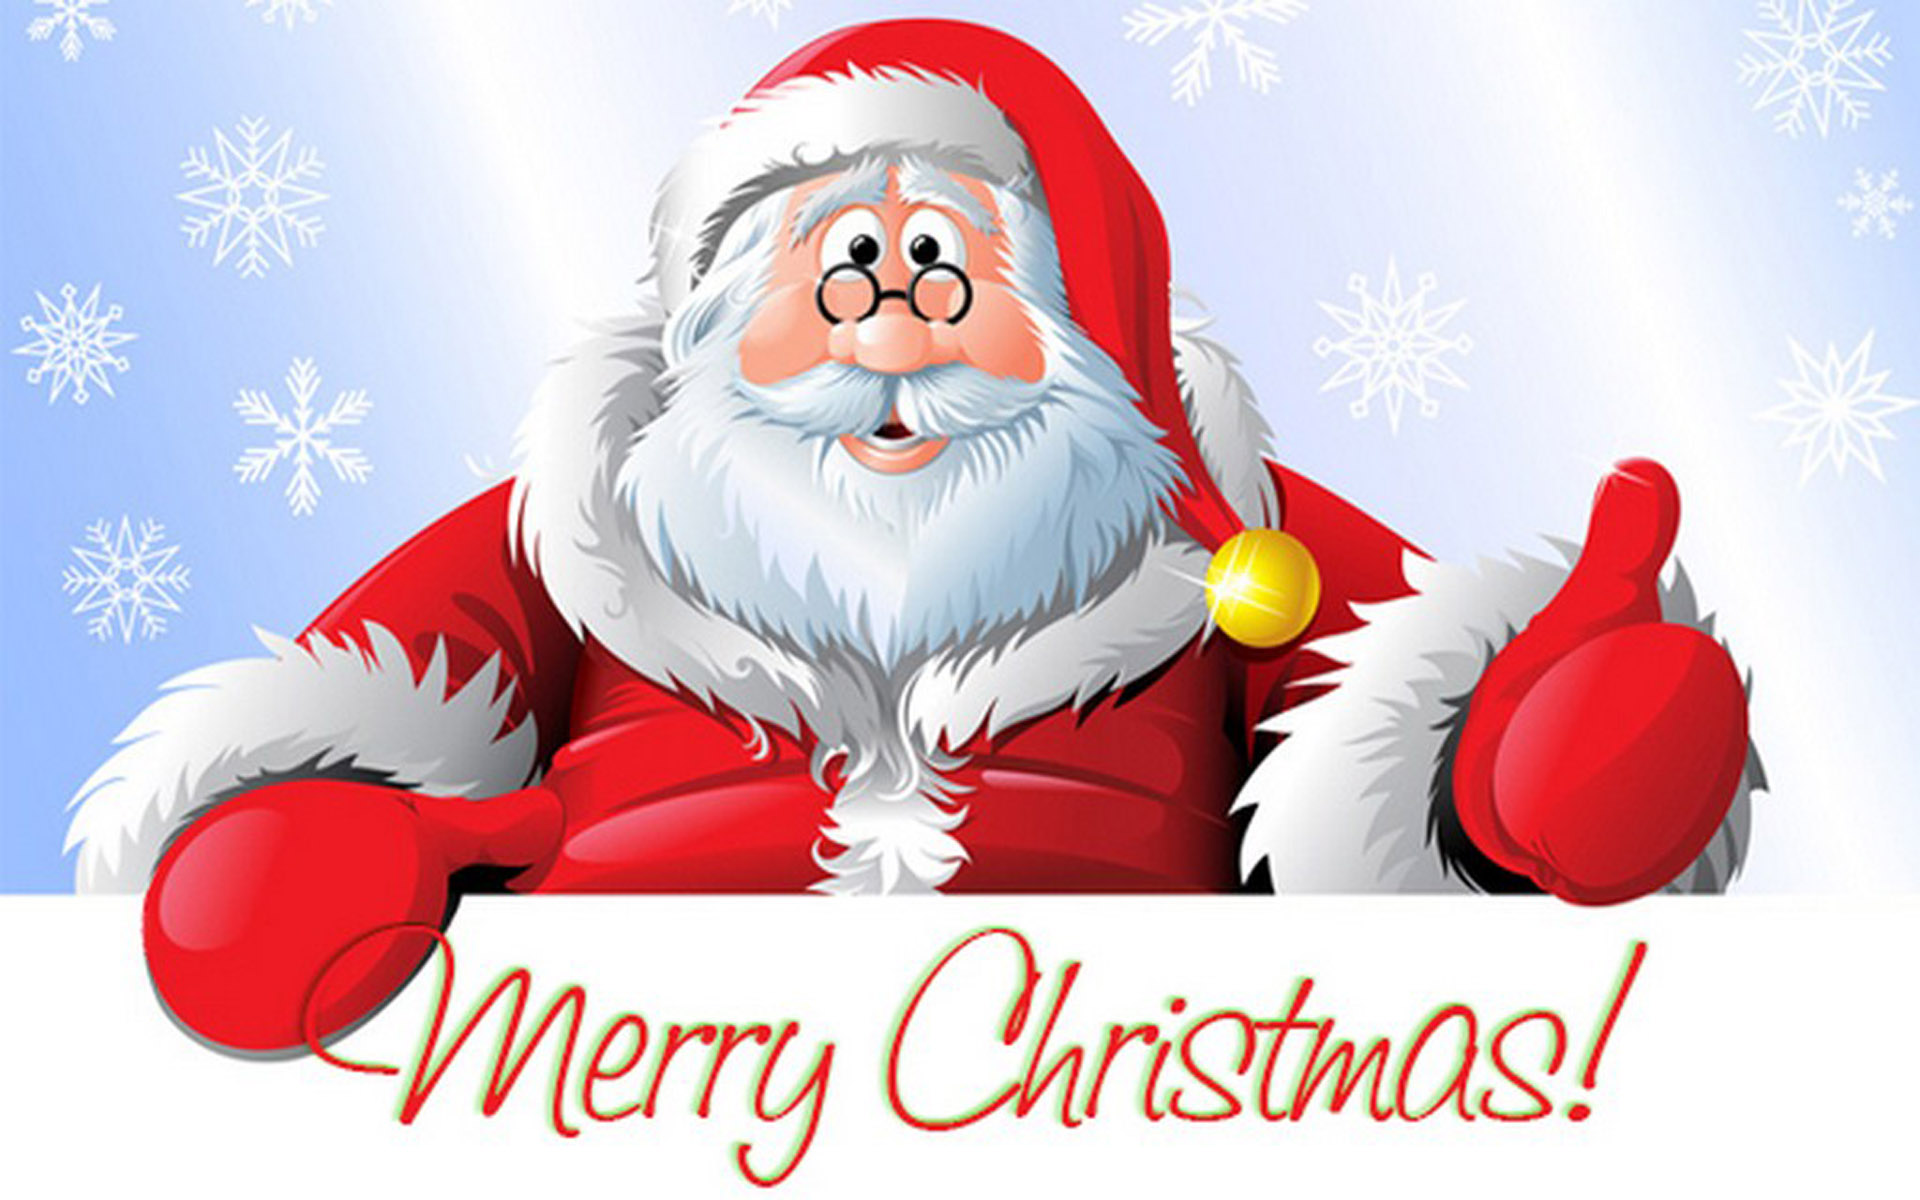 Santa Claus Merry Christmas Greeting Card For New Year 1920x1200